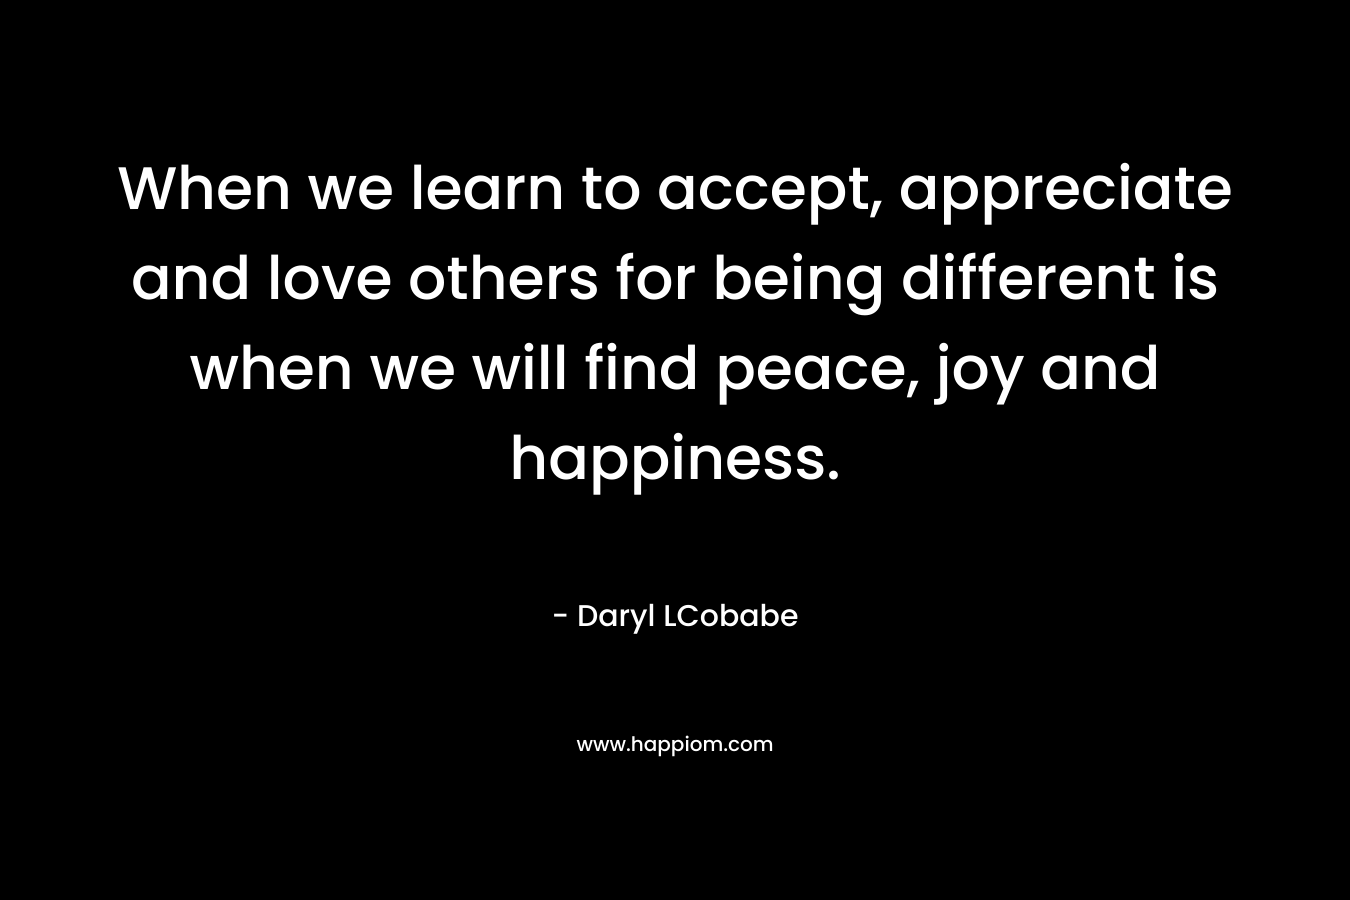 When we learn to accept, appreciate and love others for being different is when we will find peace, joy and happiness. – Daryl LCobabe